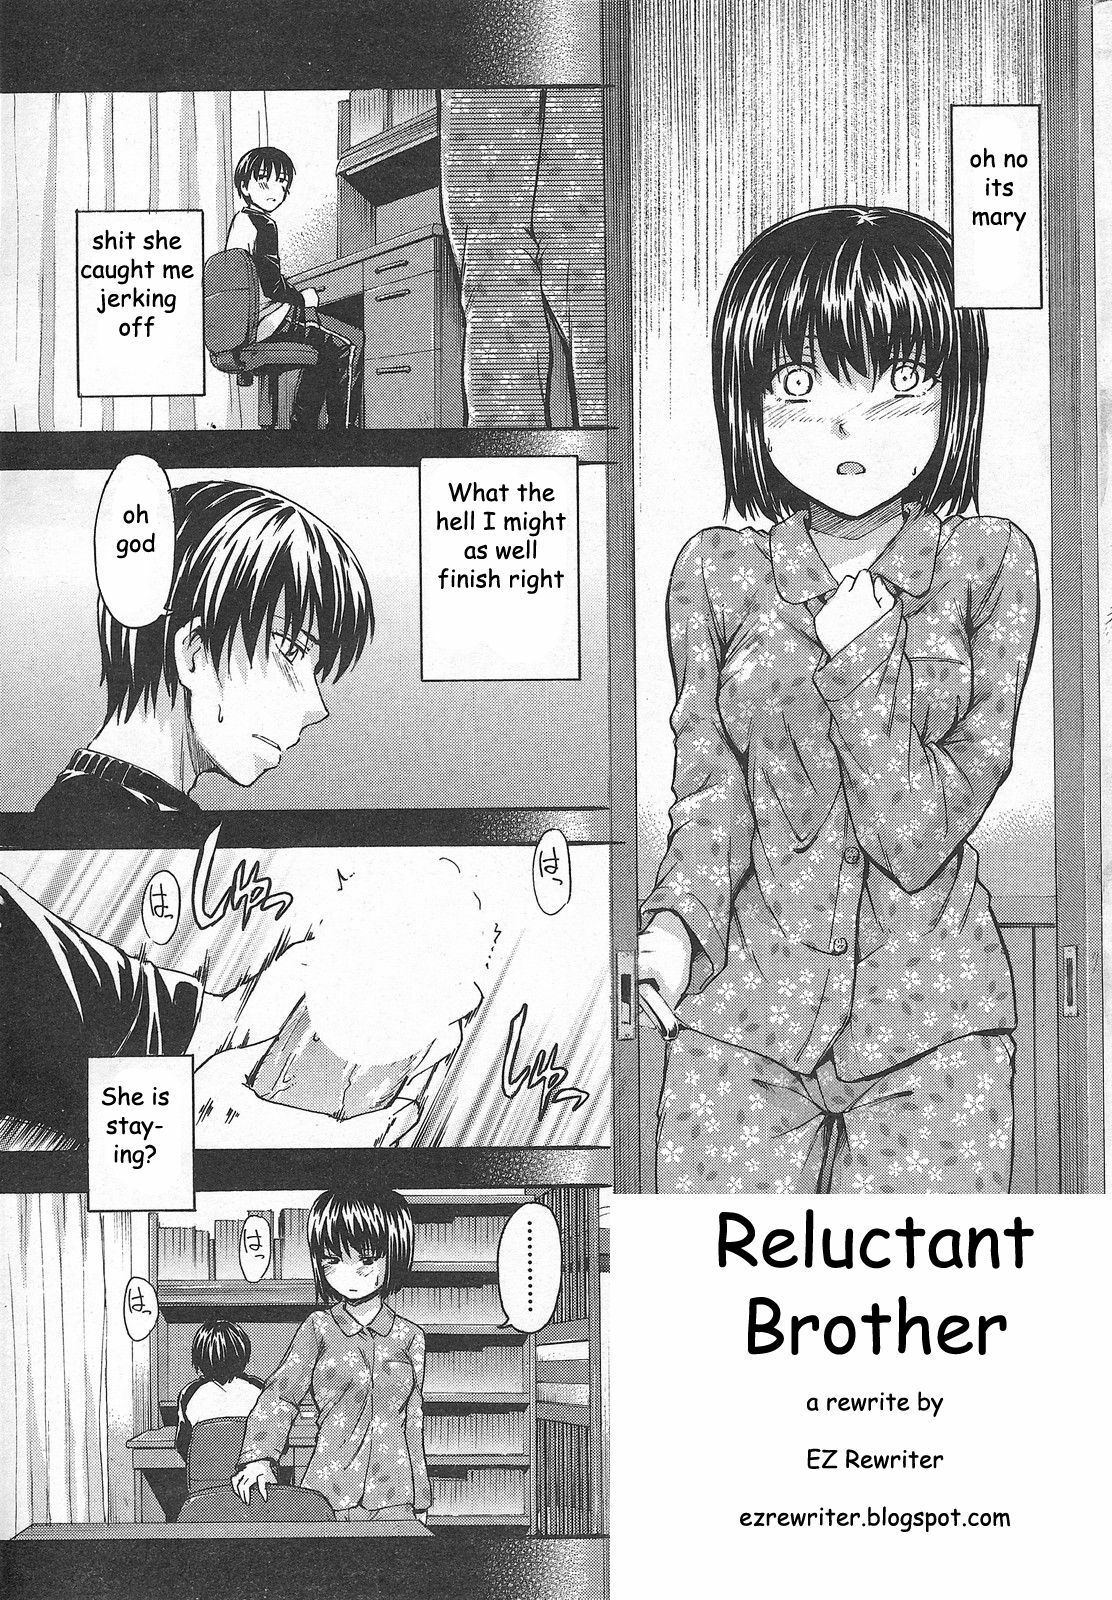 Reluctant Brother [English] [Rewrite] [EZ Rewriter] page 1 full